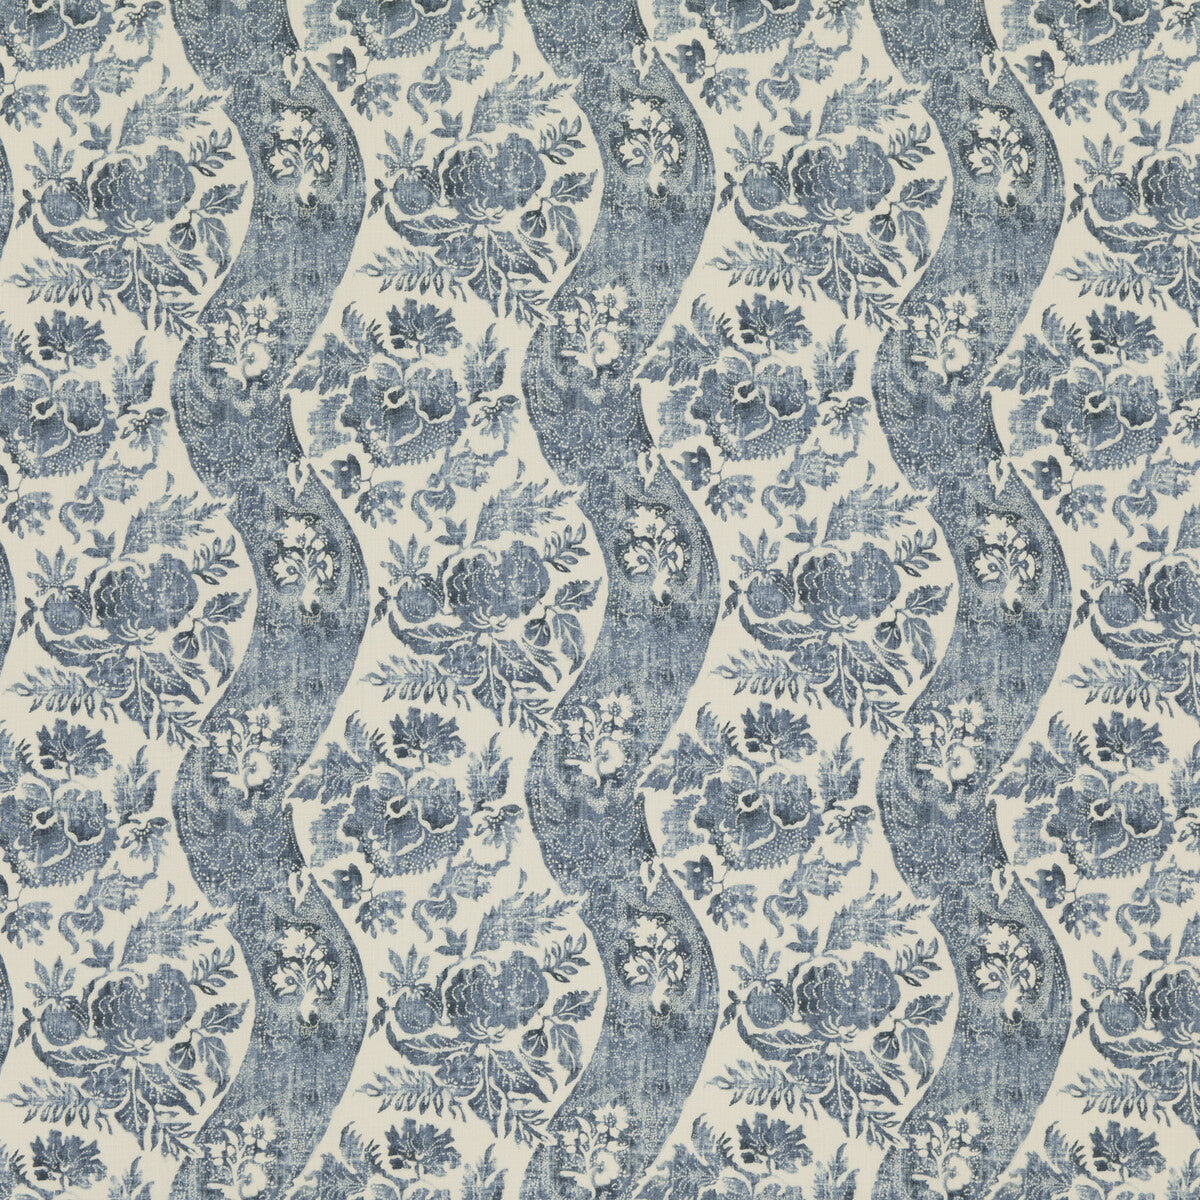 Caldbeck fabric in indigo/ivory color - pattern BP10776.1.0 - by G P &amp; J Baker in the Signature Prints collection